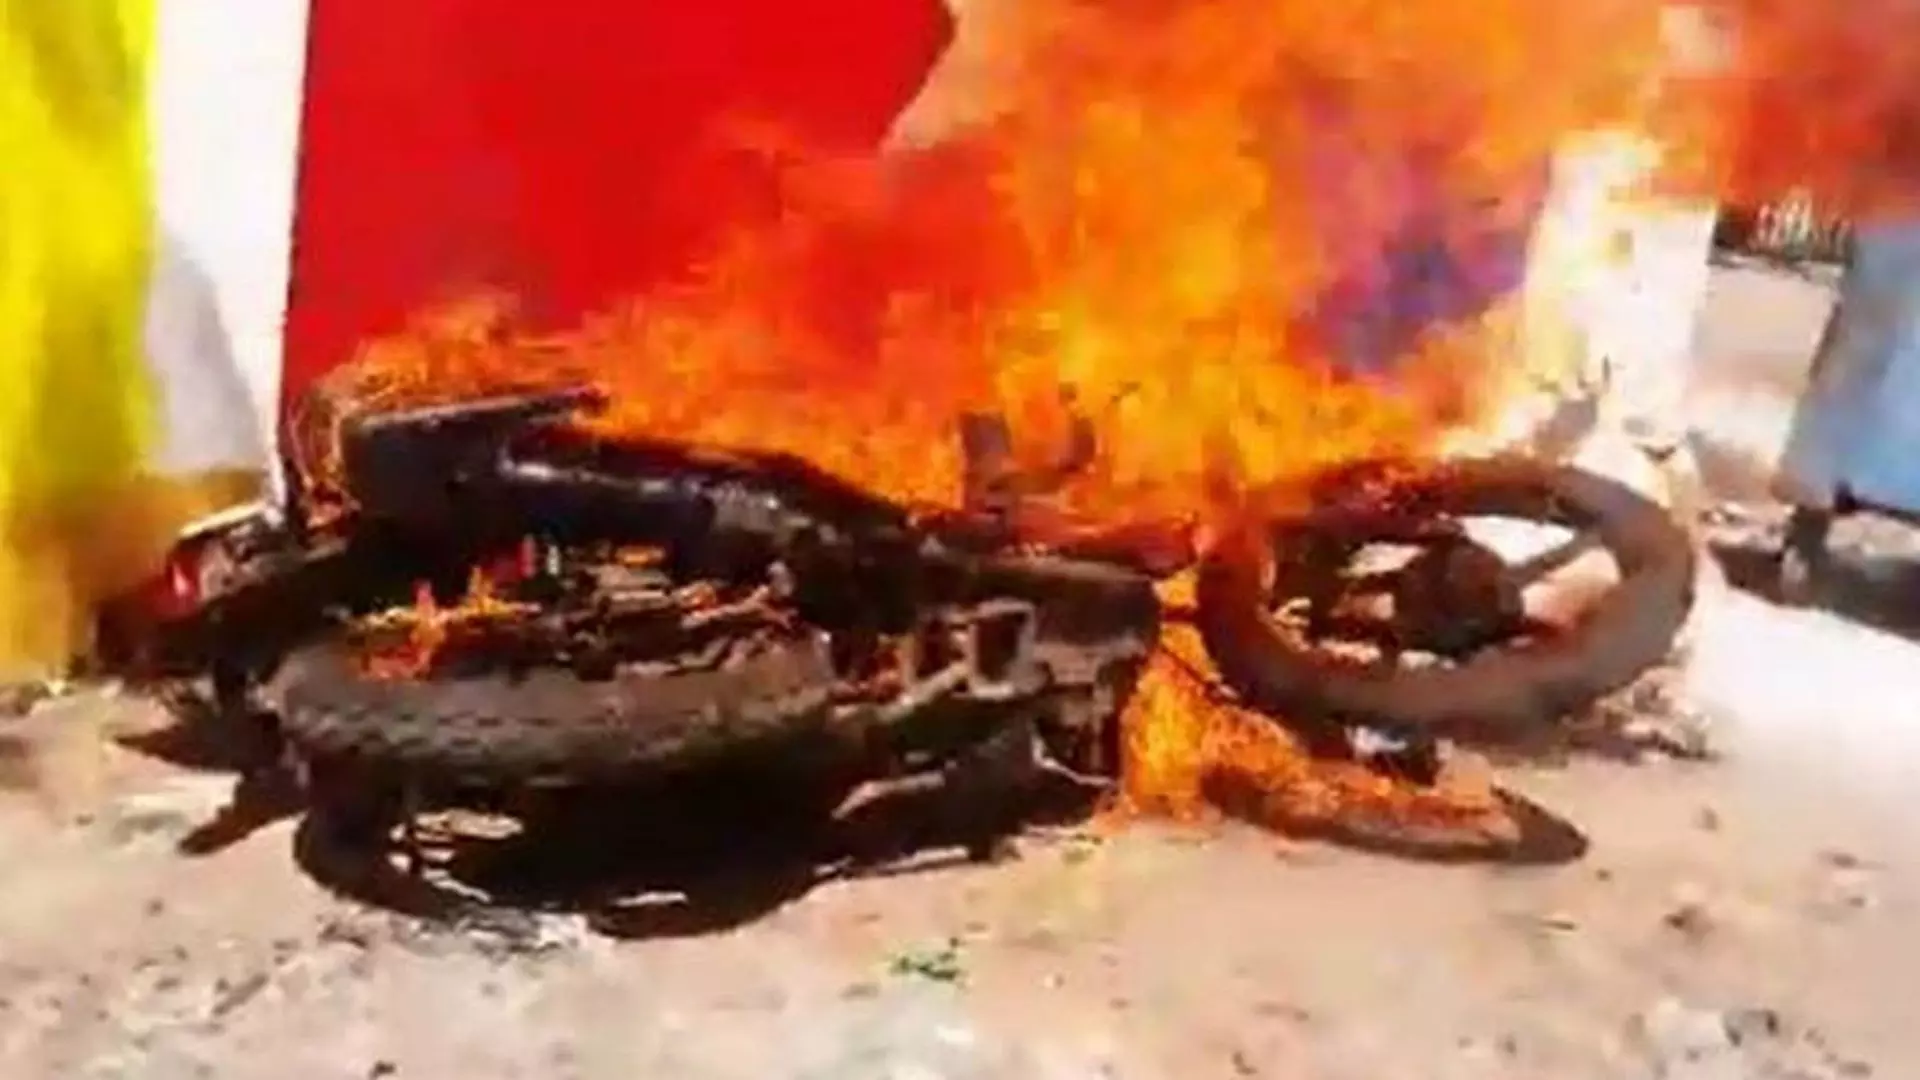 The Young Man Who Set The Bike on Fire is Being Fined in Vikarabad District